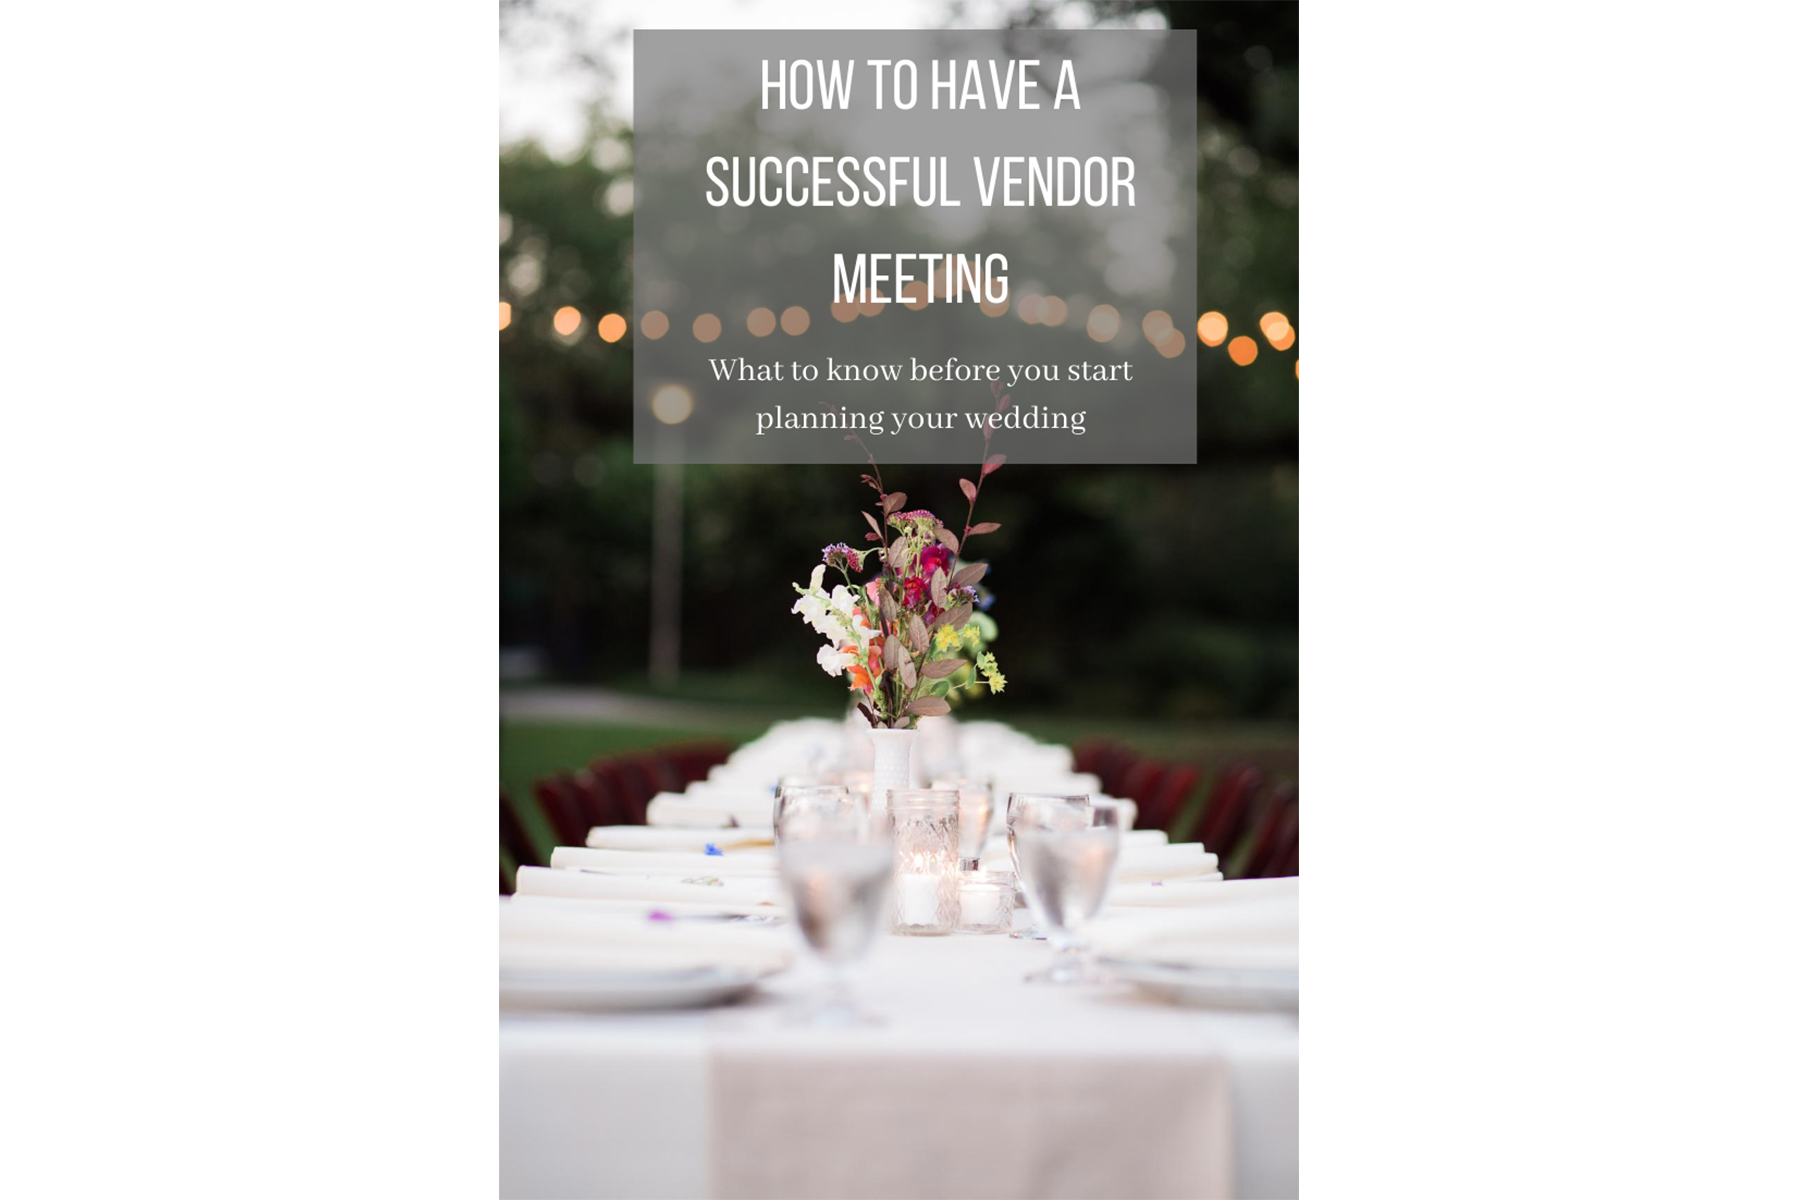 How to have a successful vendor meeting